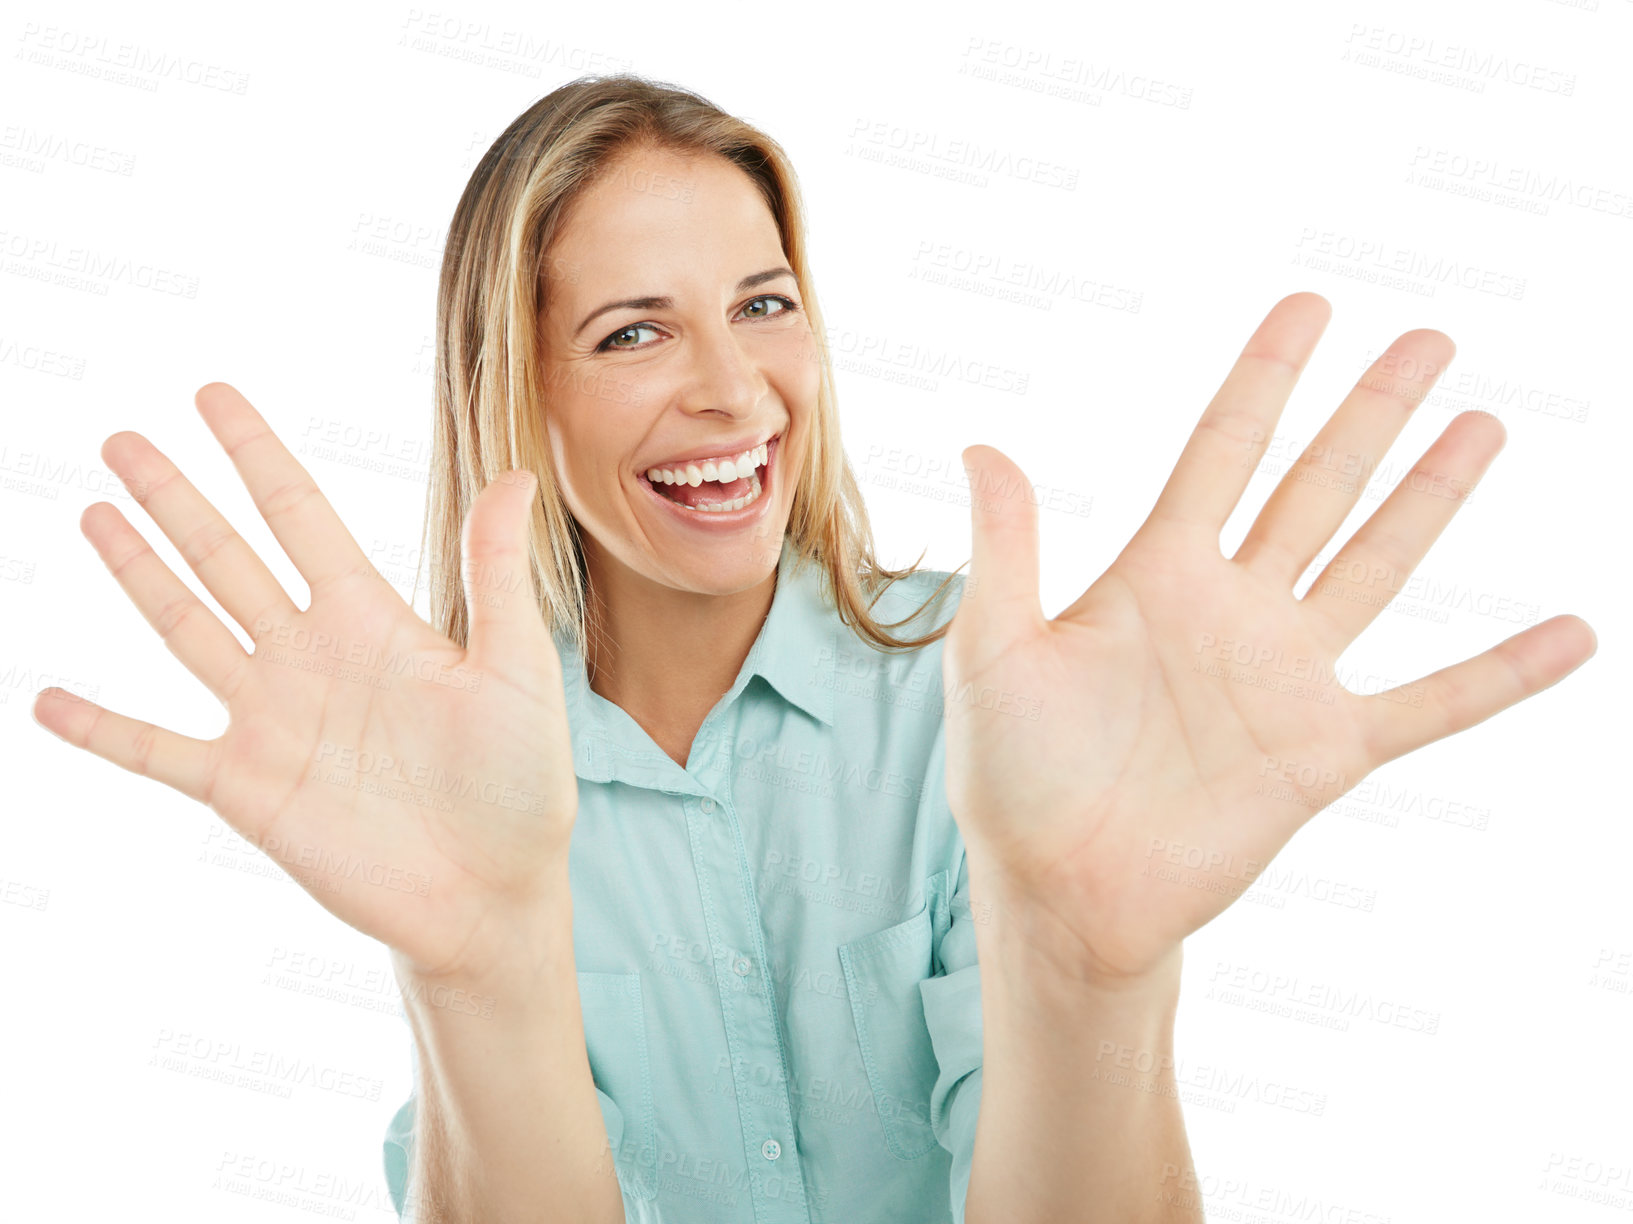 Buy stock photo Shot of a happy woman posing with her hands up against a white background